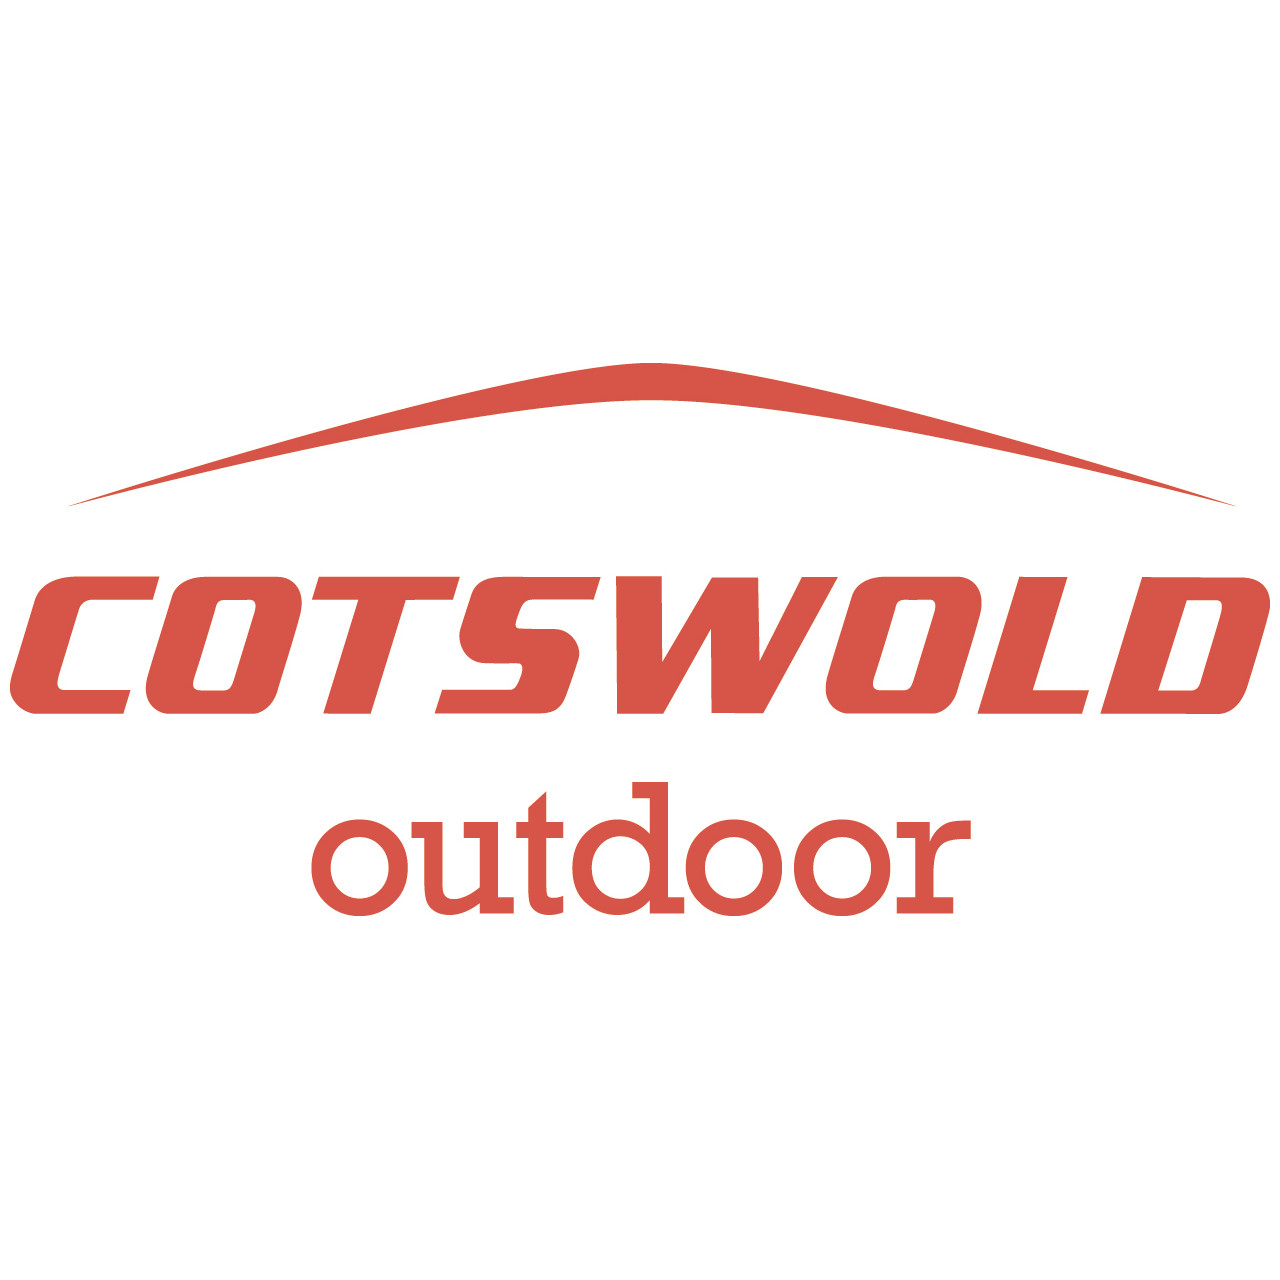 Cotswold Outdoor partner to OpFit